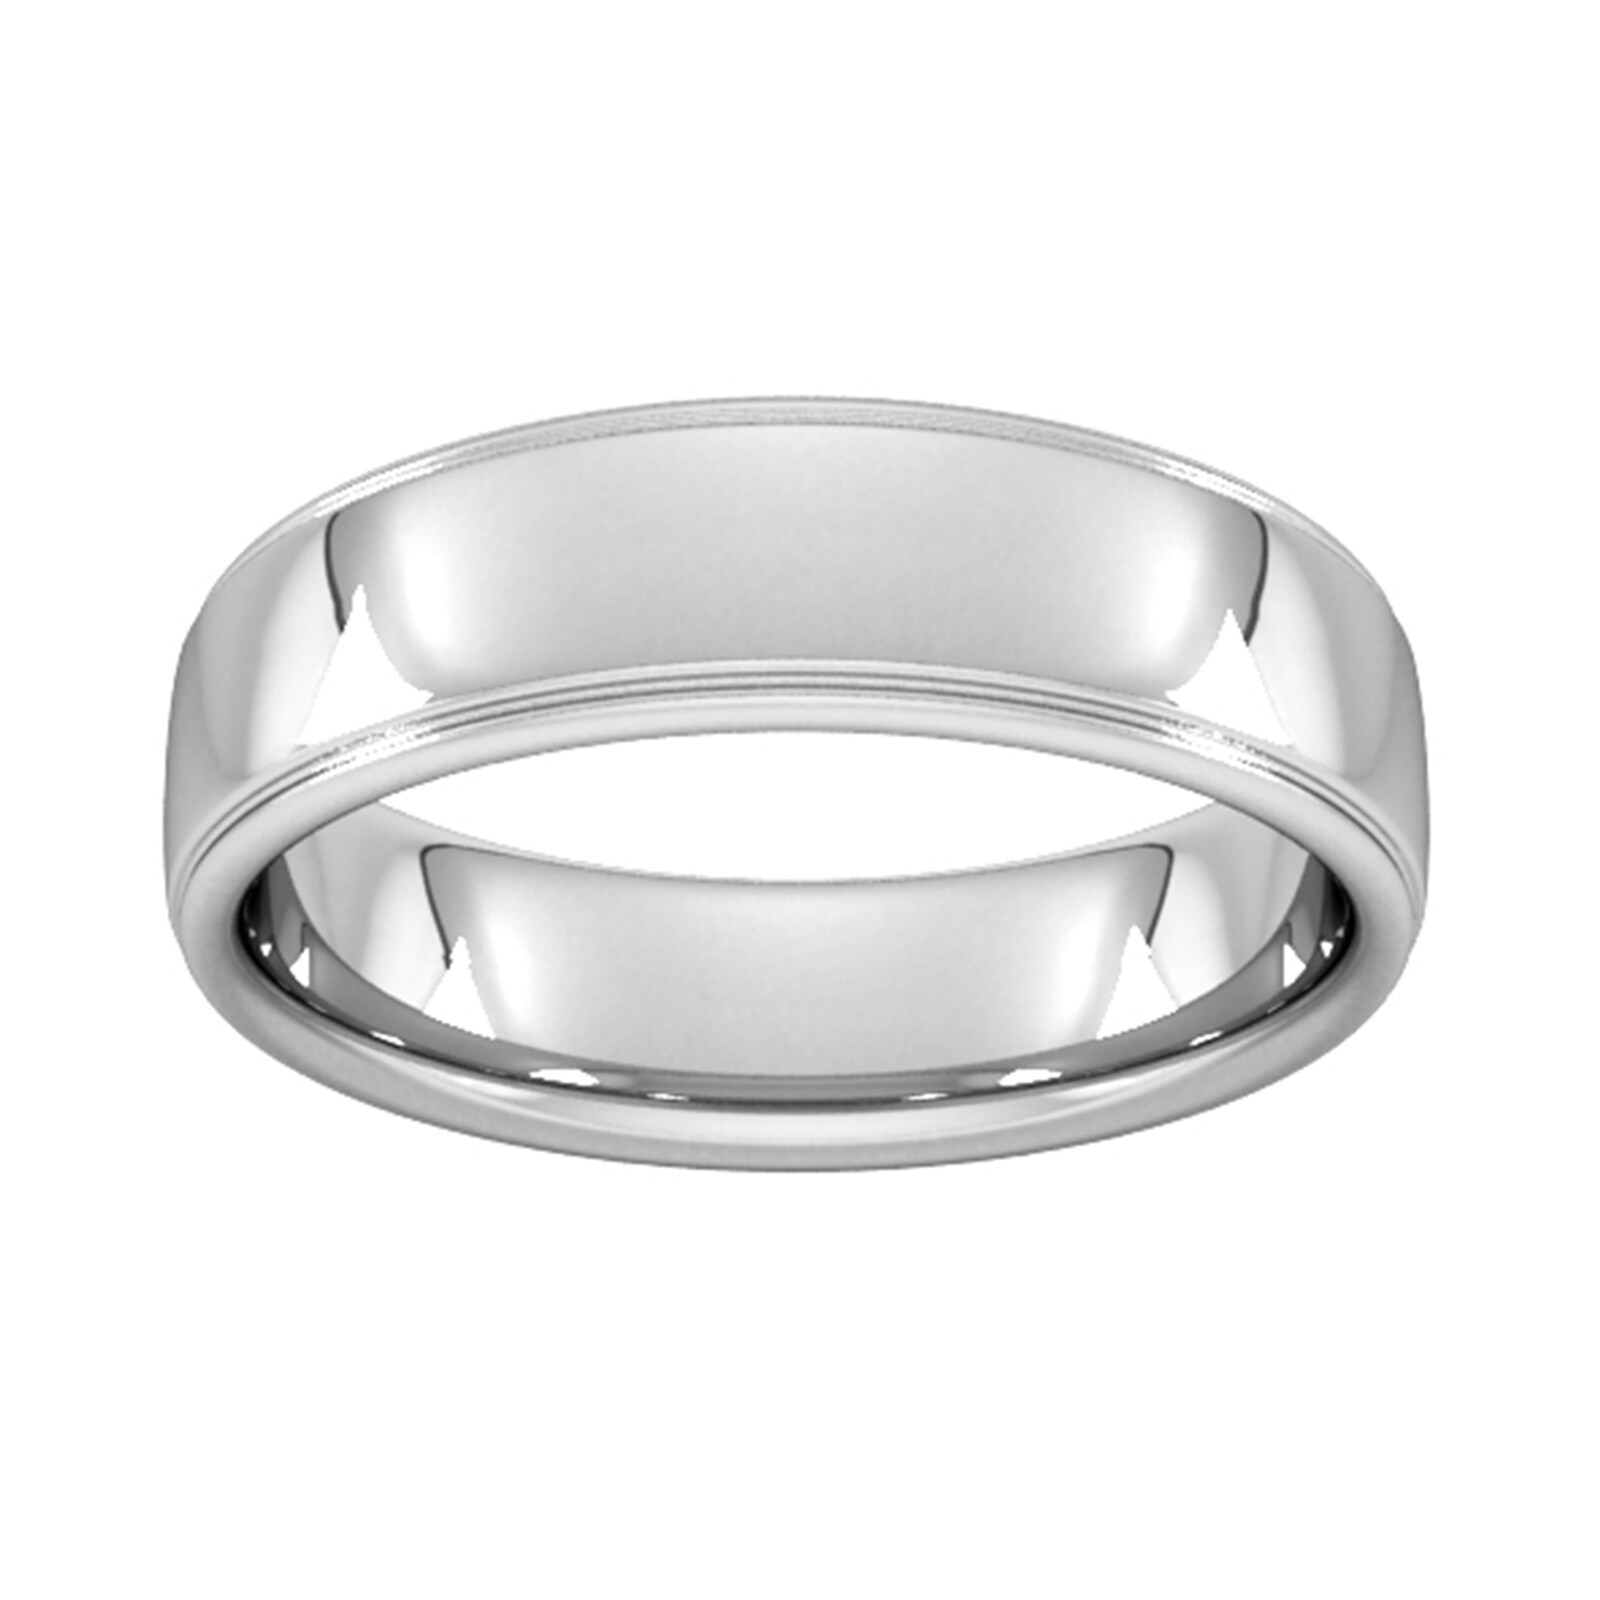 6mm d shape heavy polished finish with grooves wedding ring in 950 palladium - ring size q